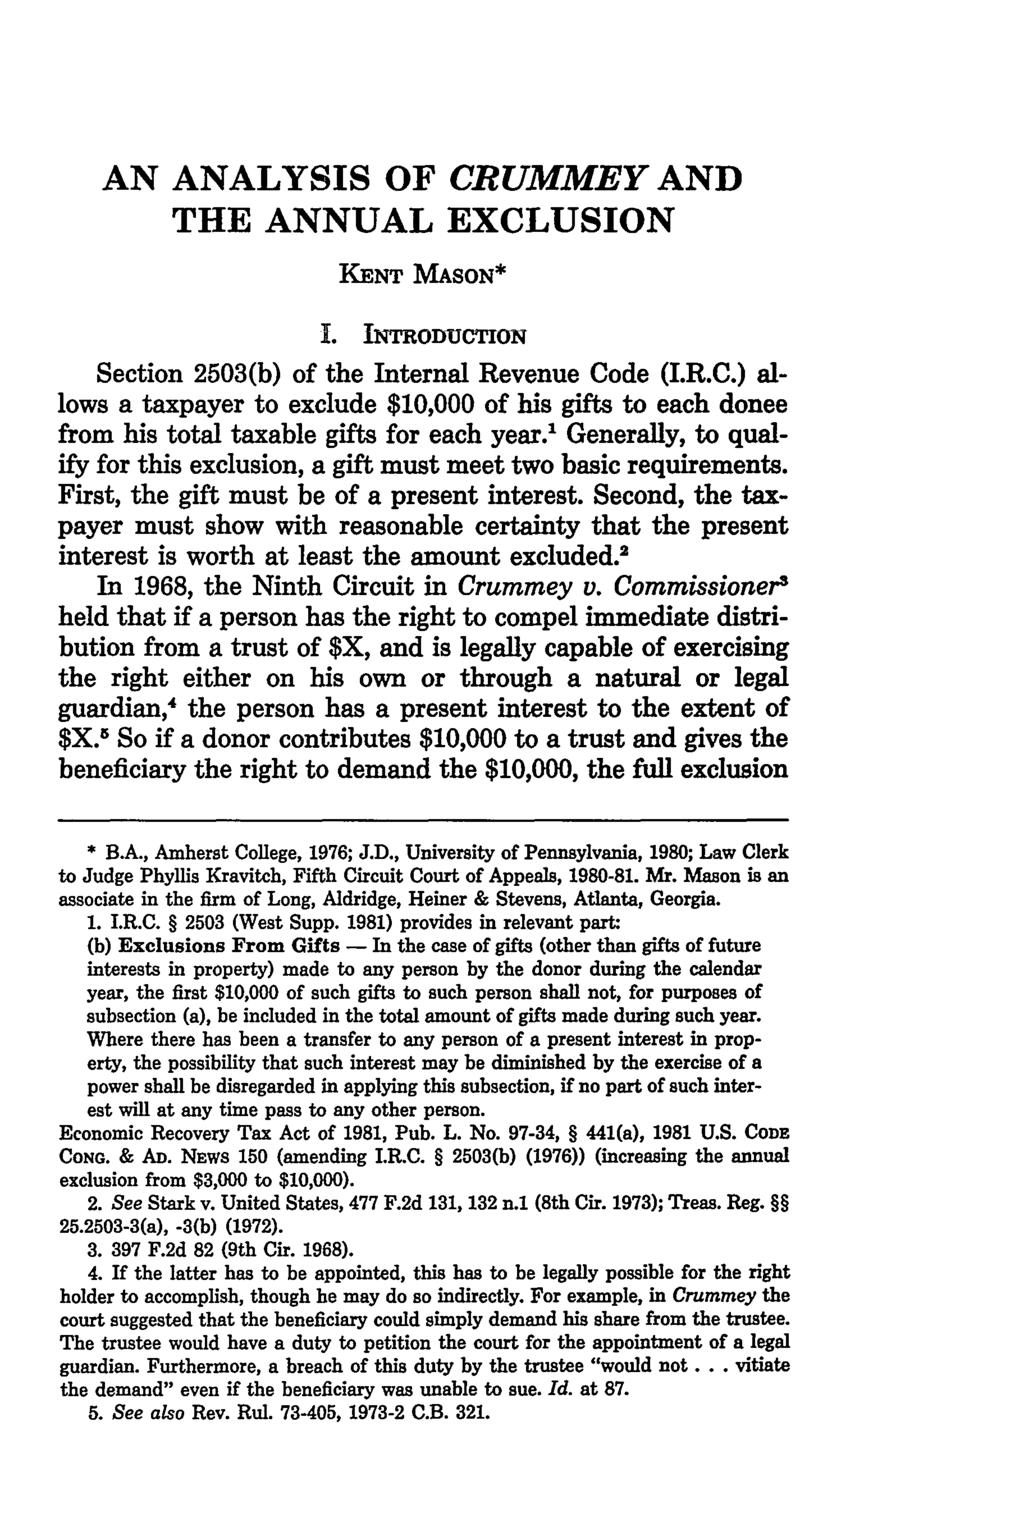 AN ANALYSIS OF CRUMMEY AND THE ANNUAL EXCLUSION KENT MASON* I. INTRODUCTION Section 2503(b) of the Internal Revenue Code (I.R.C.) allows a taxpayer to exclude $10,000 of his gifts to each donee from his total taxable gifts for each year.